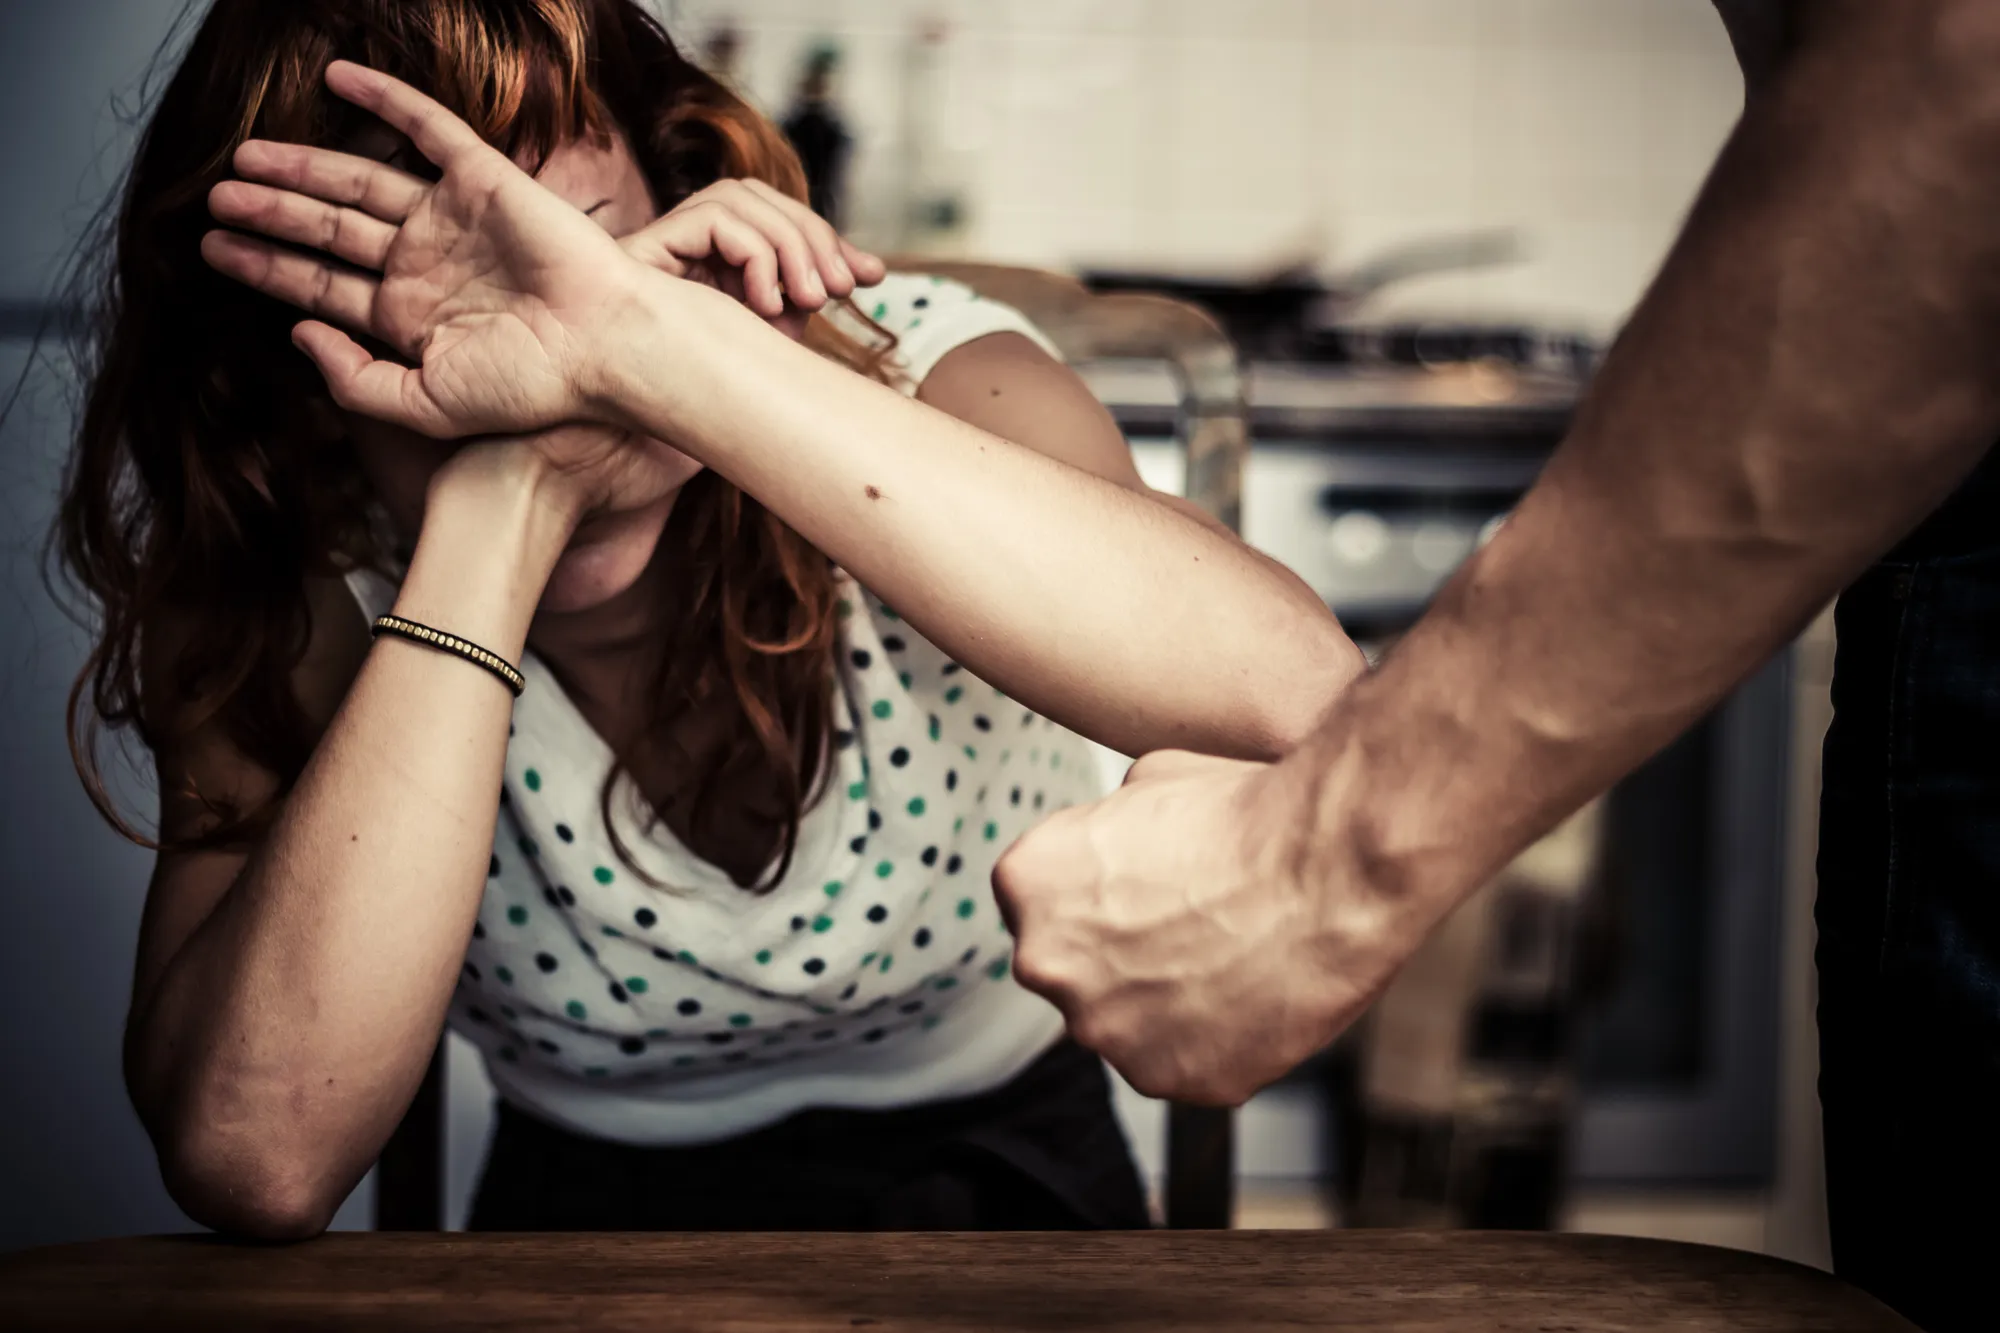 Why Getting Out Of Abusive Relationships Is So Hard